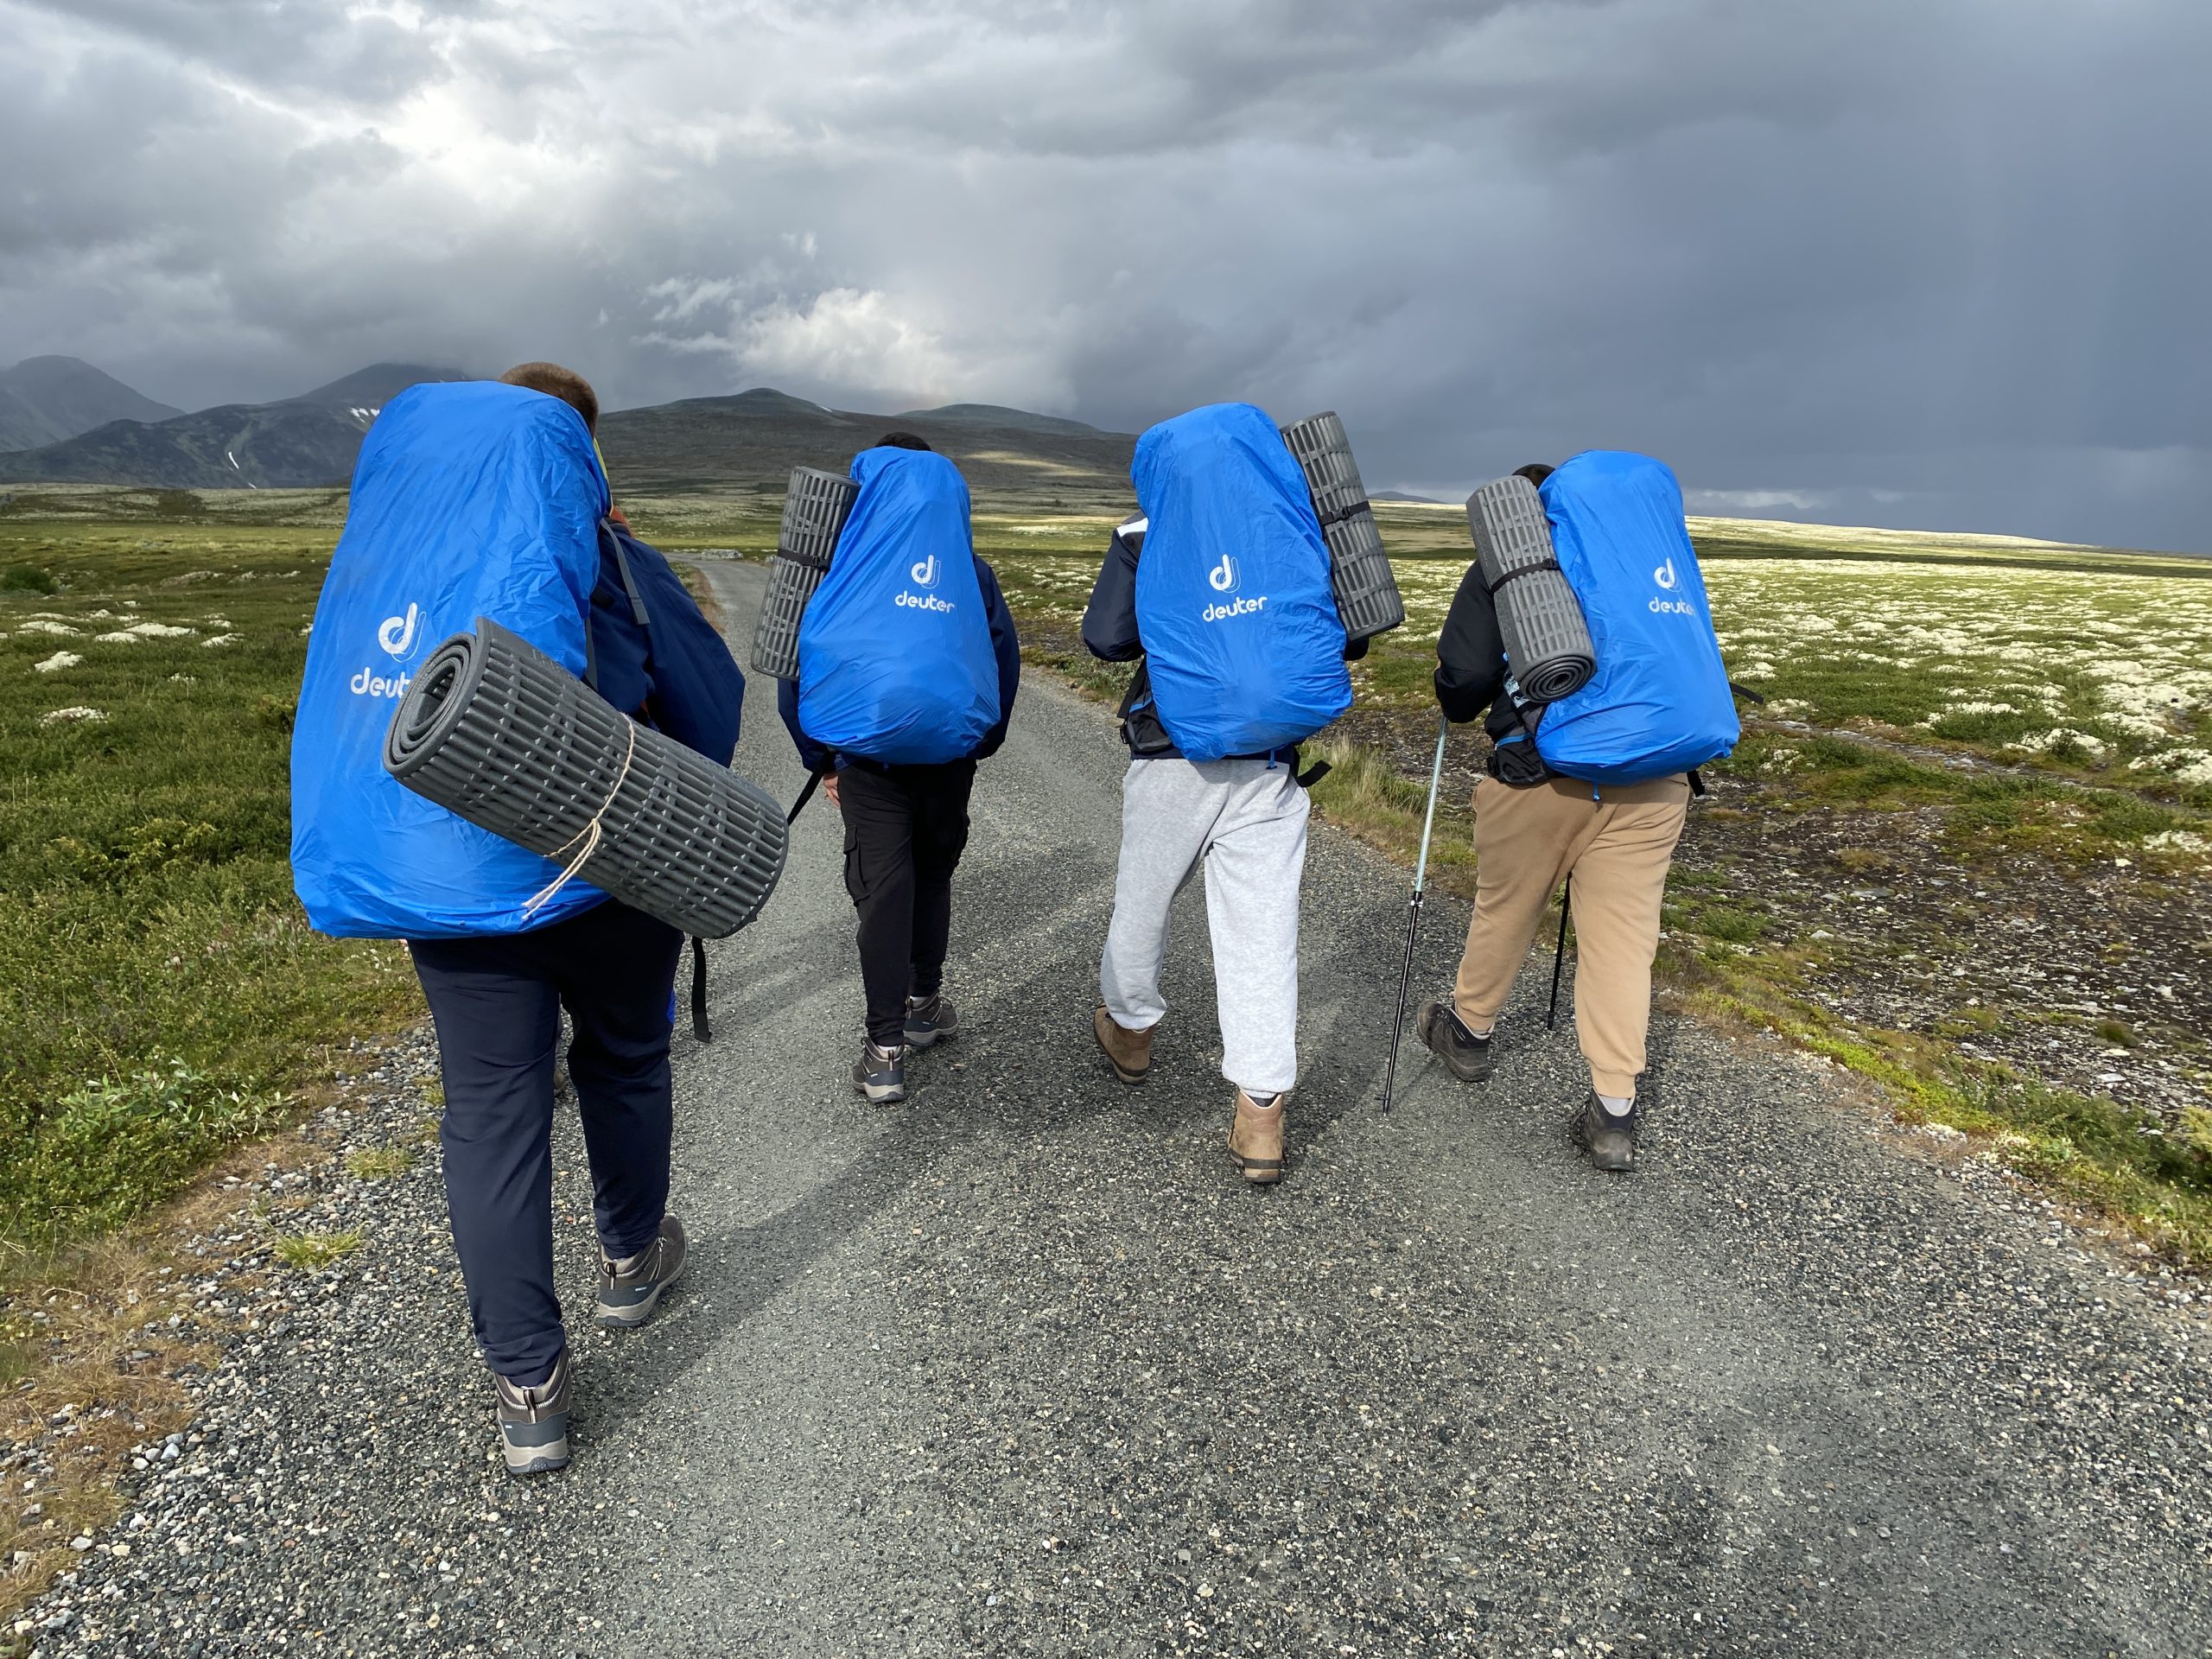 Students from Berlin on Gold expedition in Rondane National Park, Norway